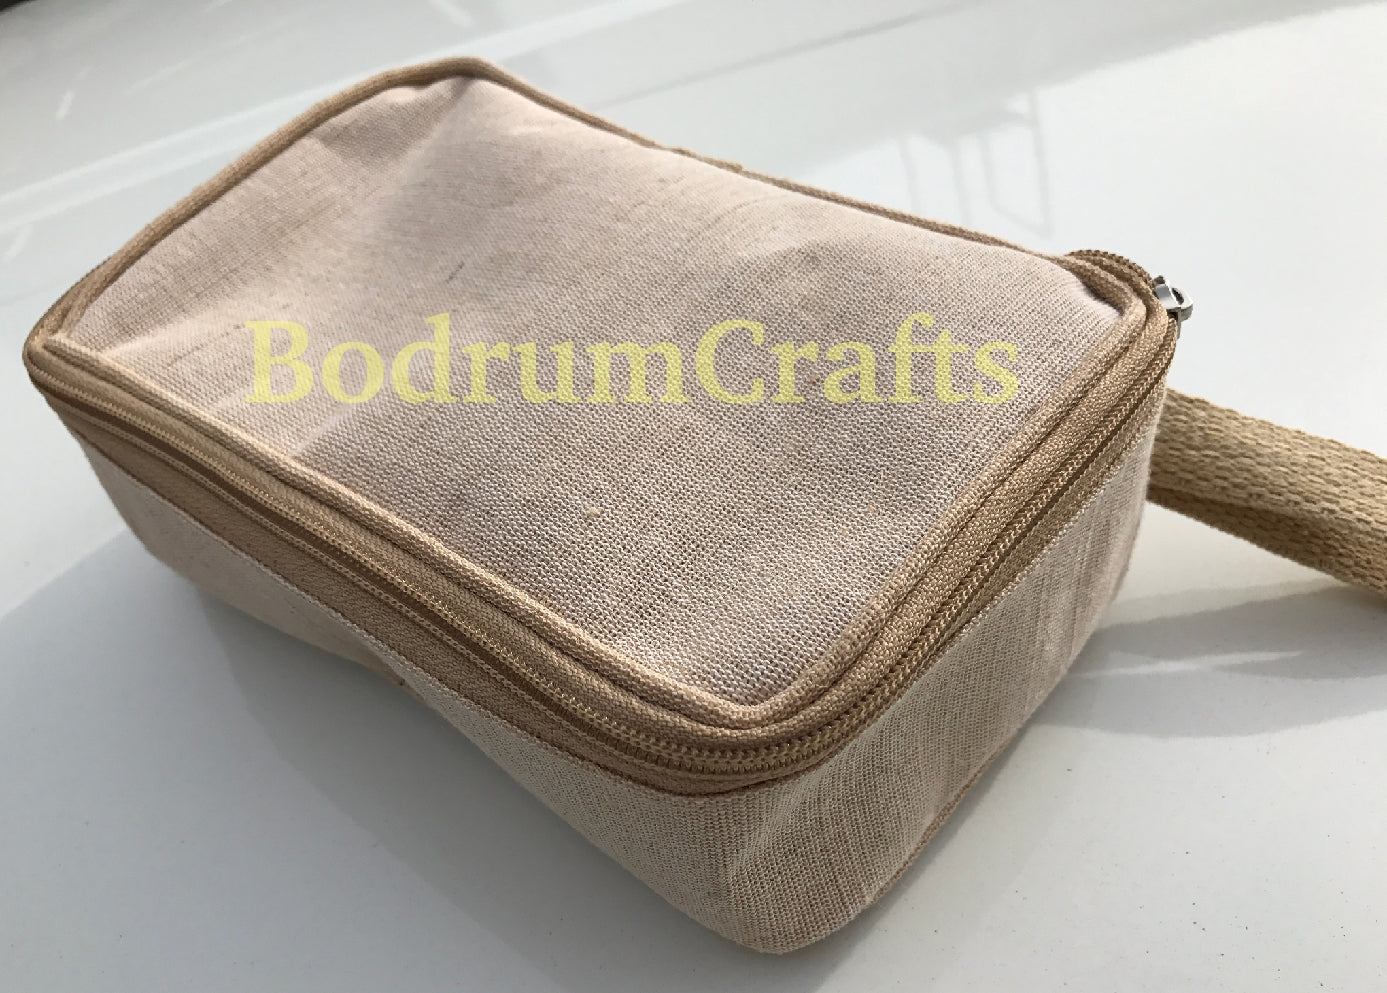 Leather Cosmetic Bag, Make up Toiletry Bag Dopp Kit Case